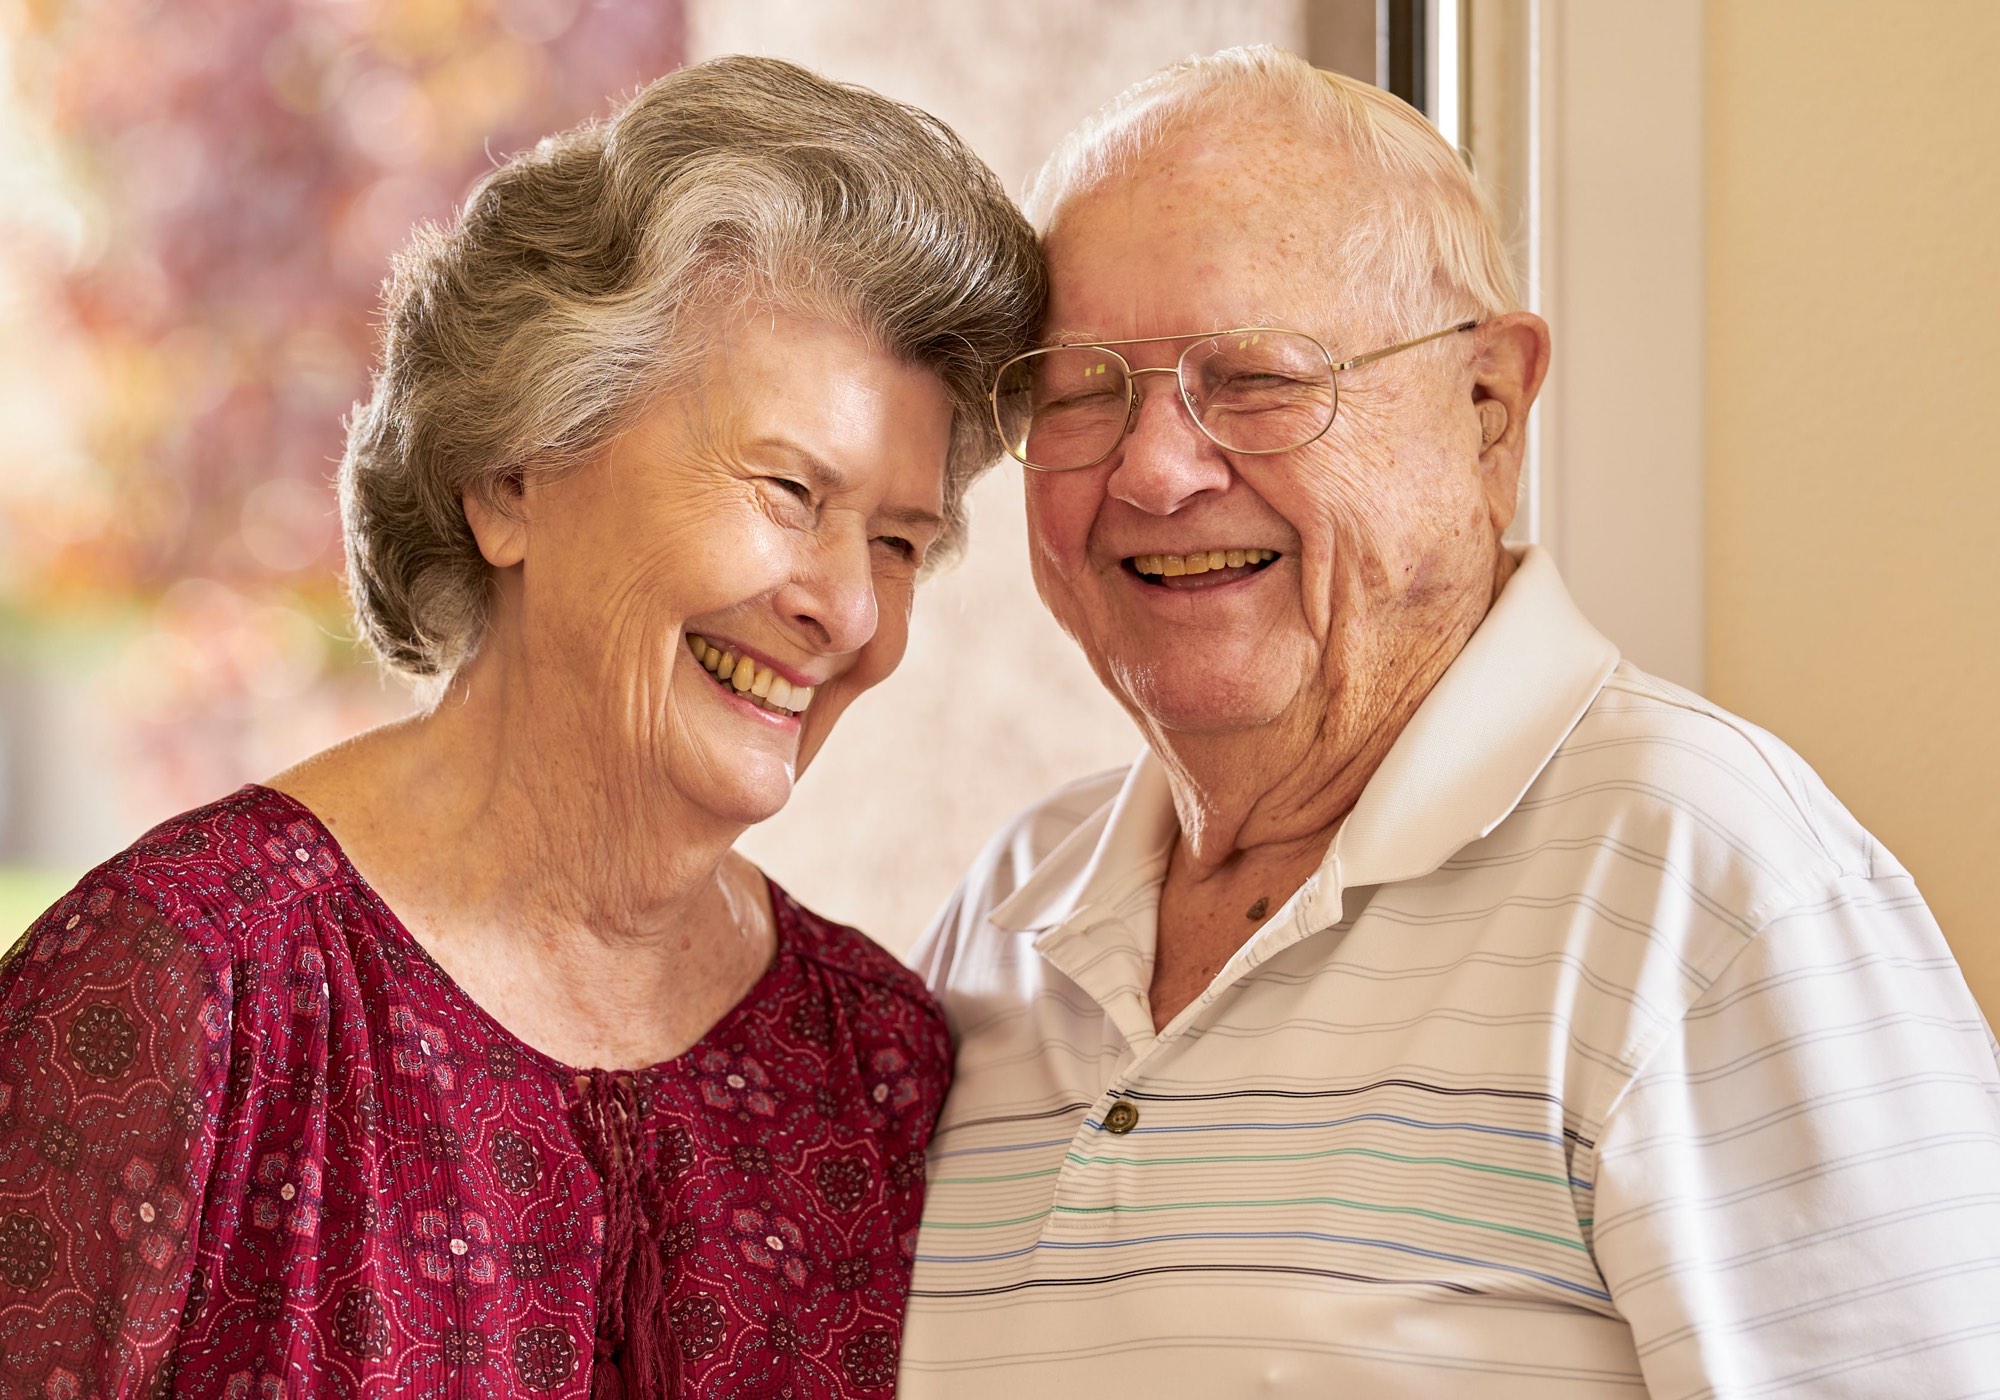 Download our FREE “Guide to Home Safety for Seniors” eBook to get the answers you need.